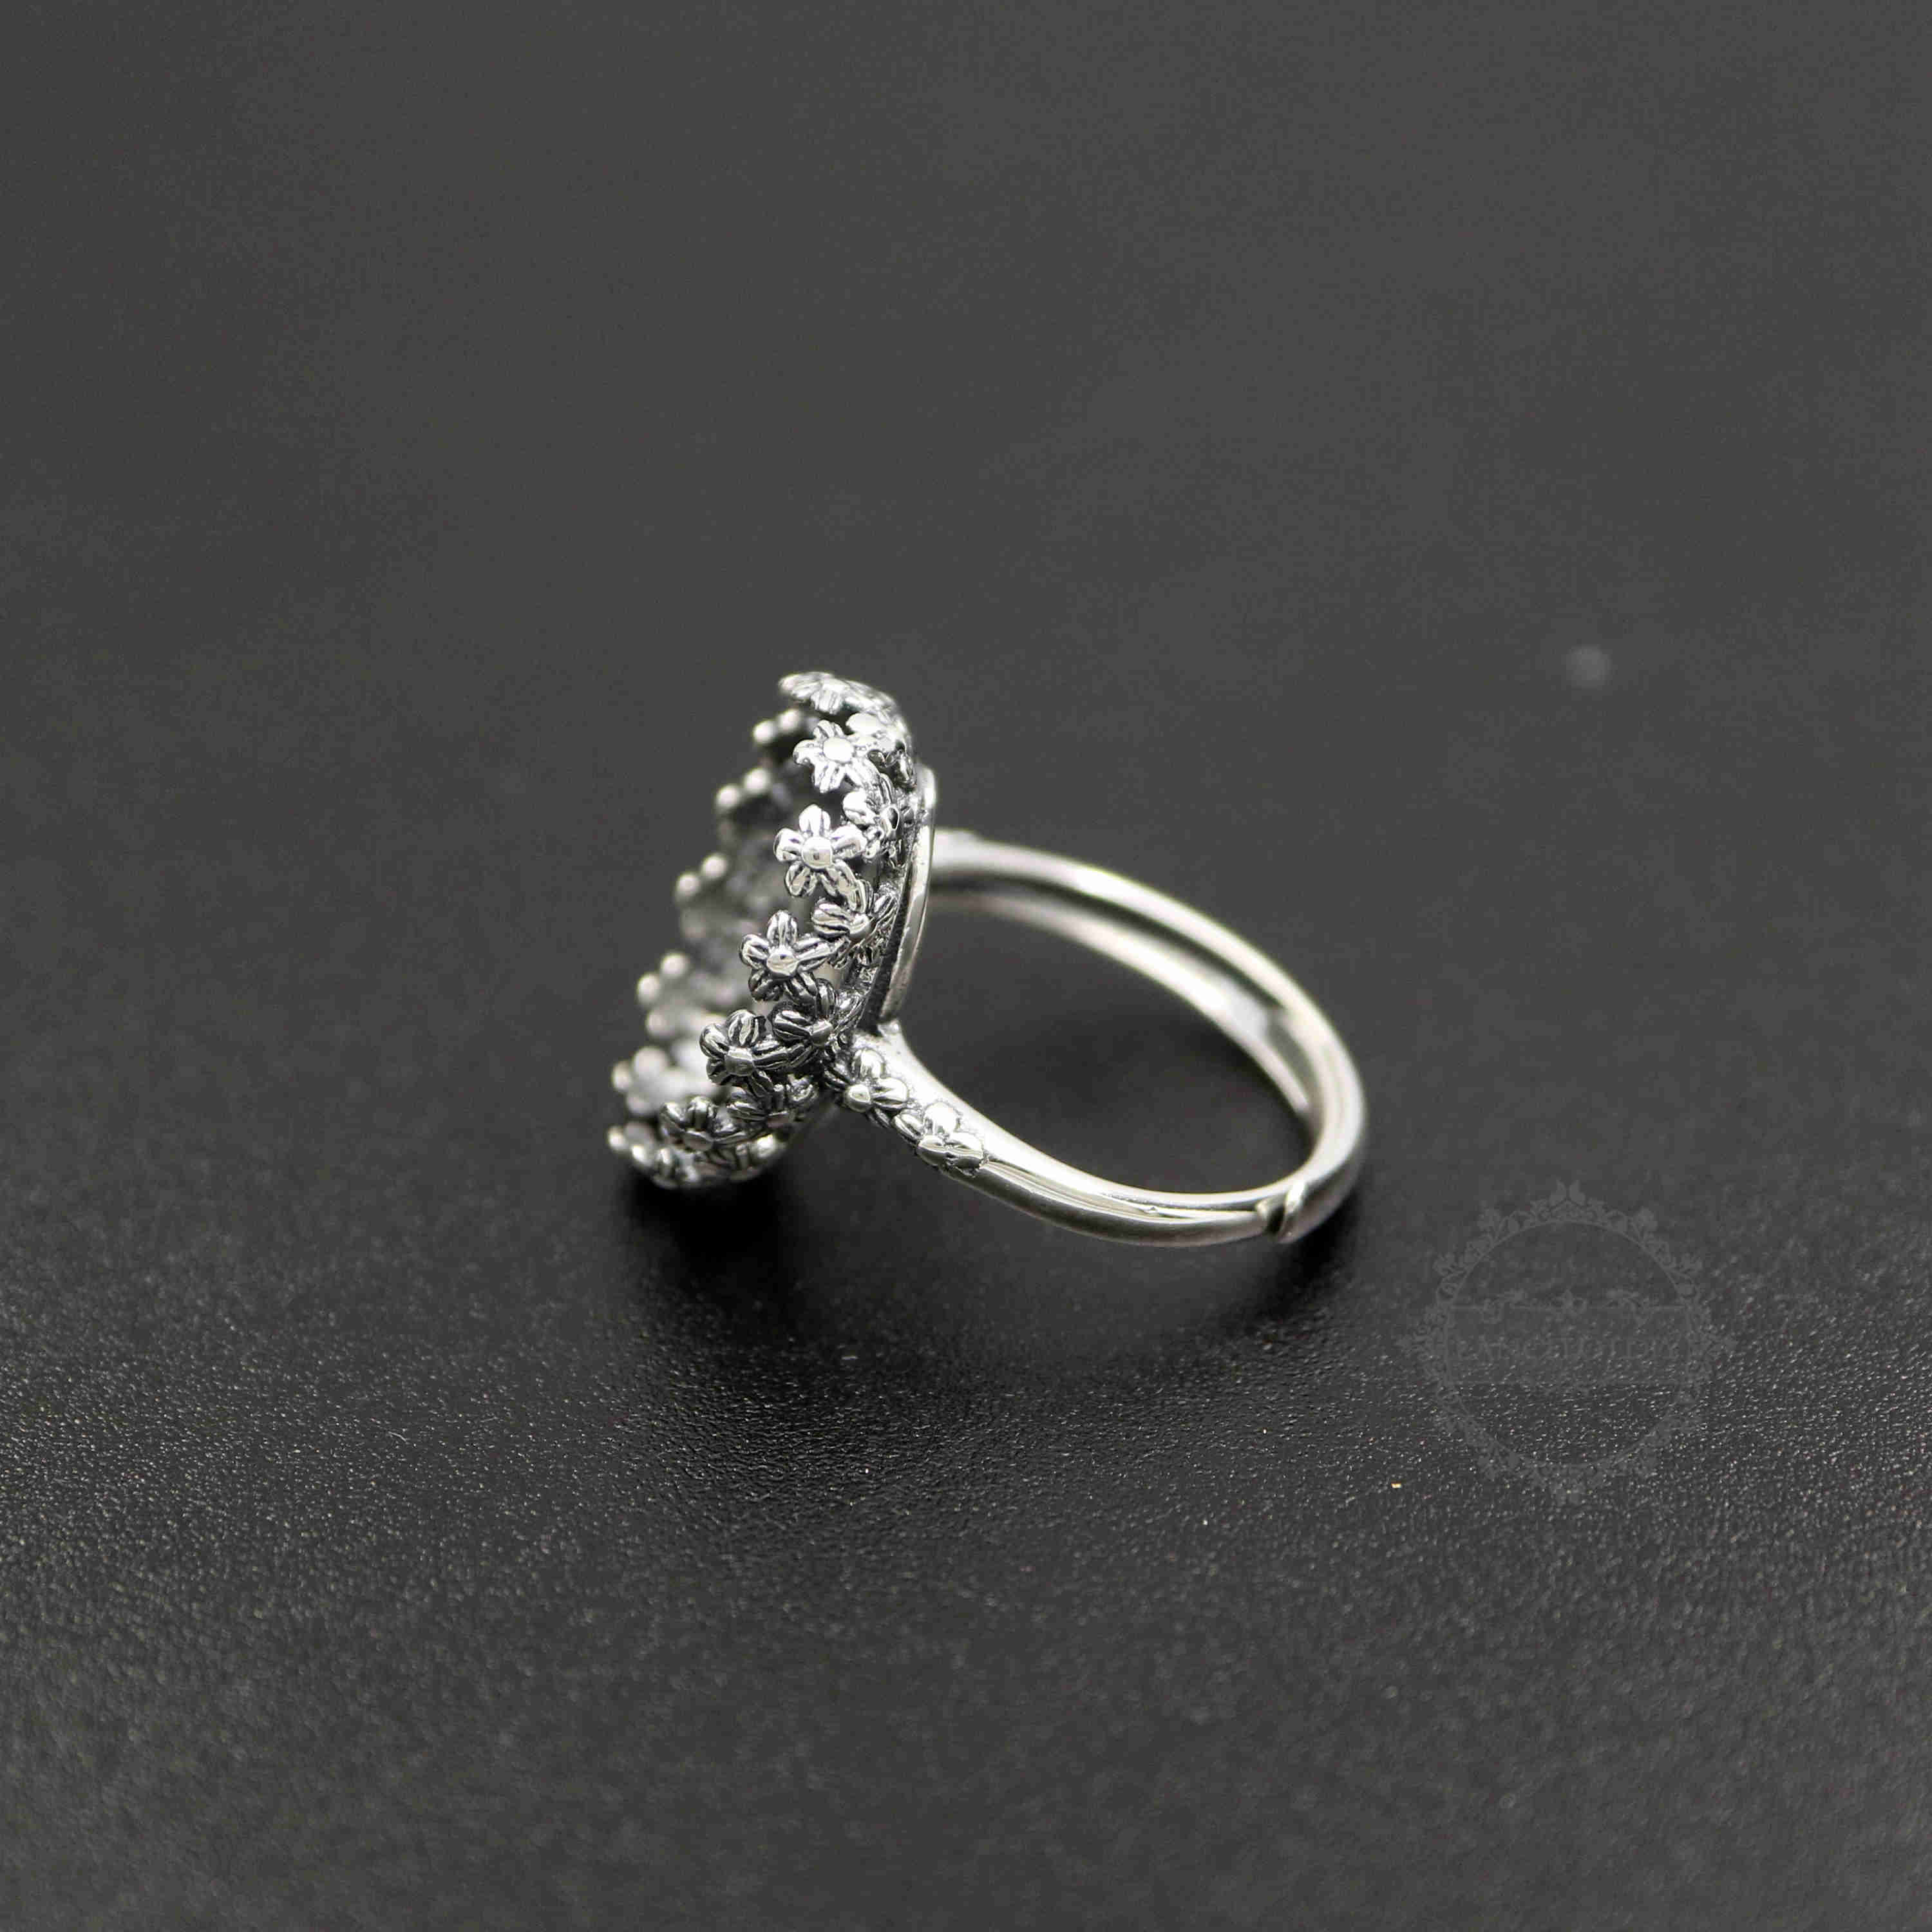 1Pcs 13X18MM Antiqued Oval Flower Bezel Solid 925 Sterling Silver Adjustable Ring Settings 1223085 - Click Image to Close